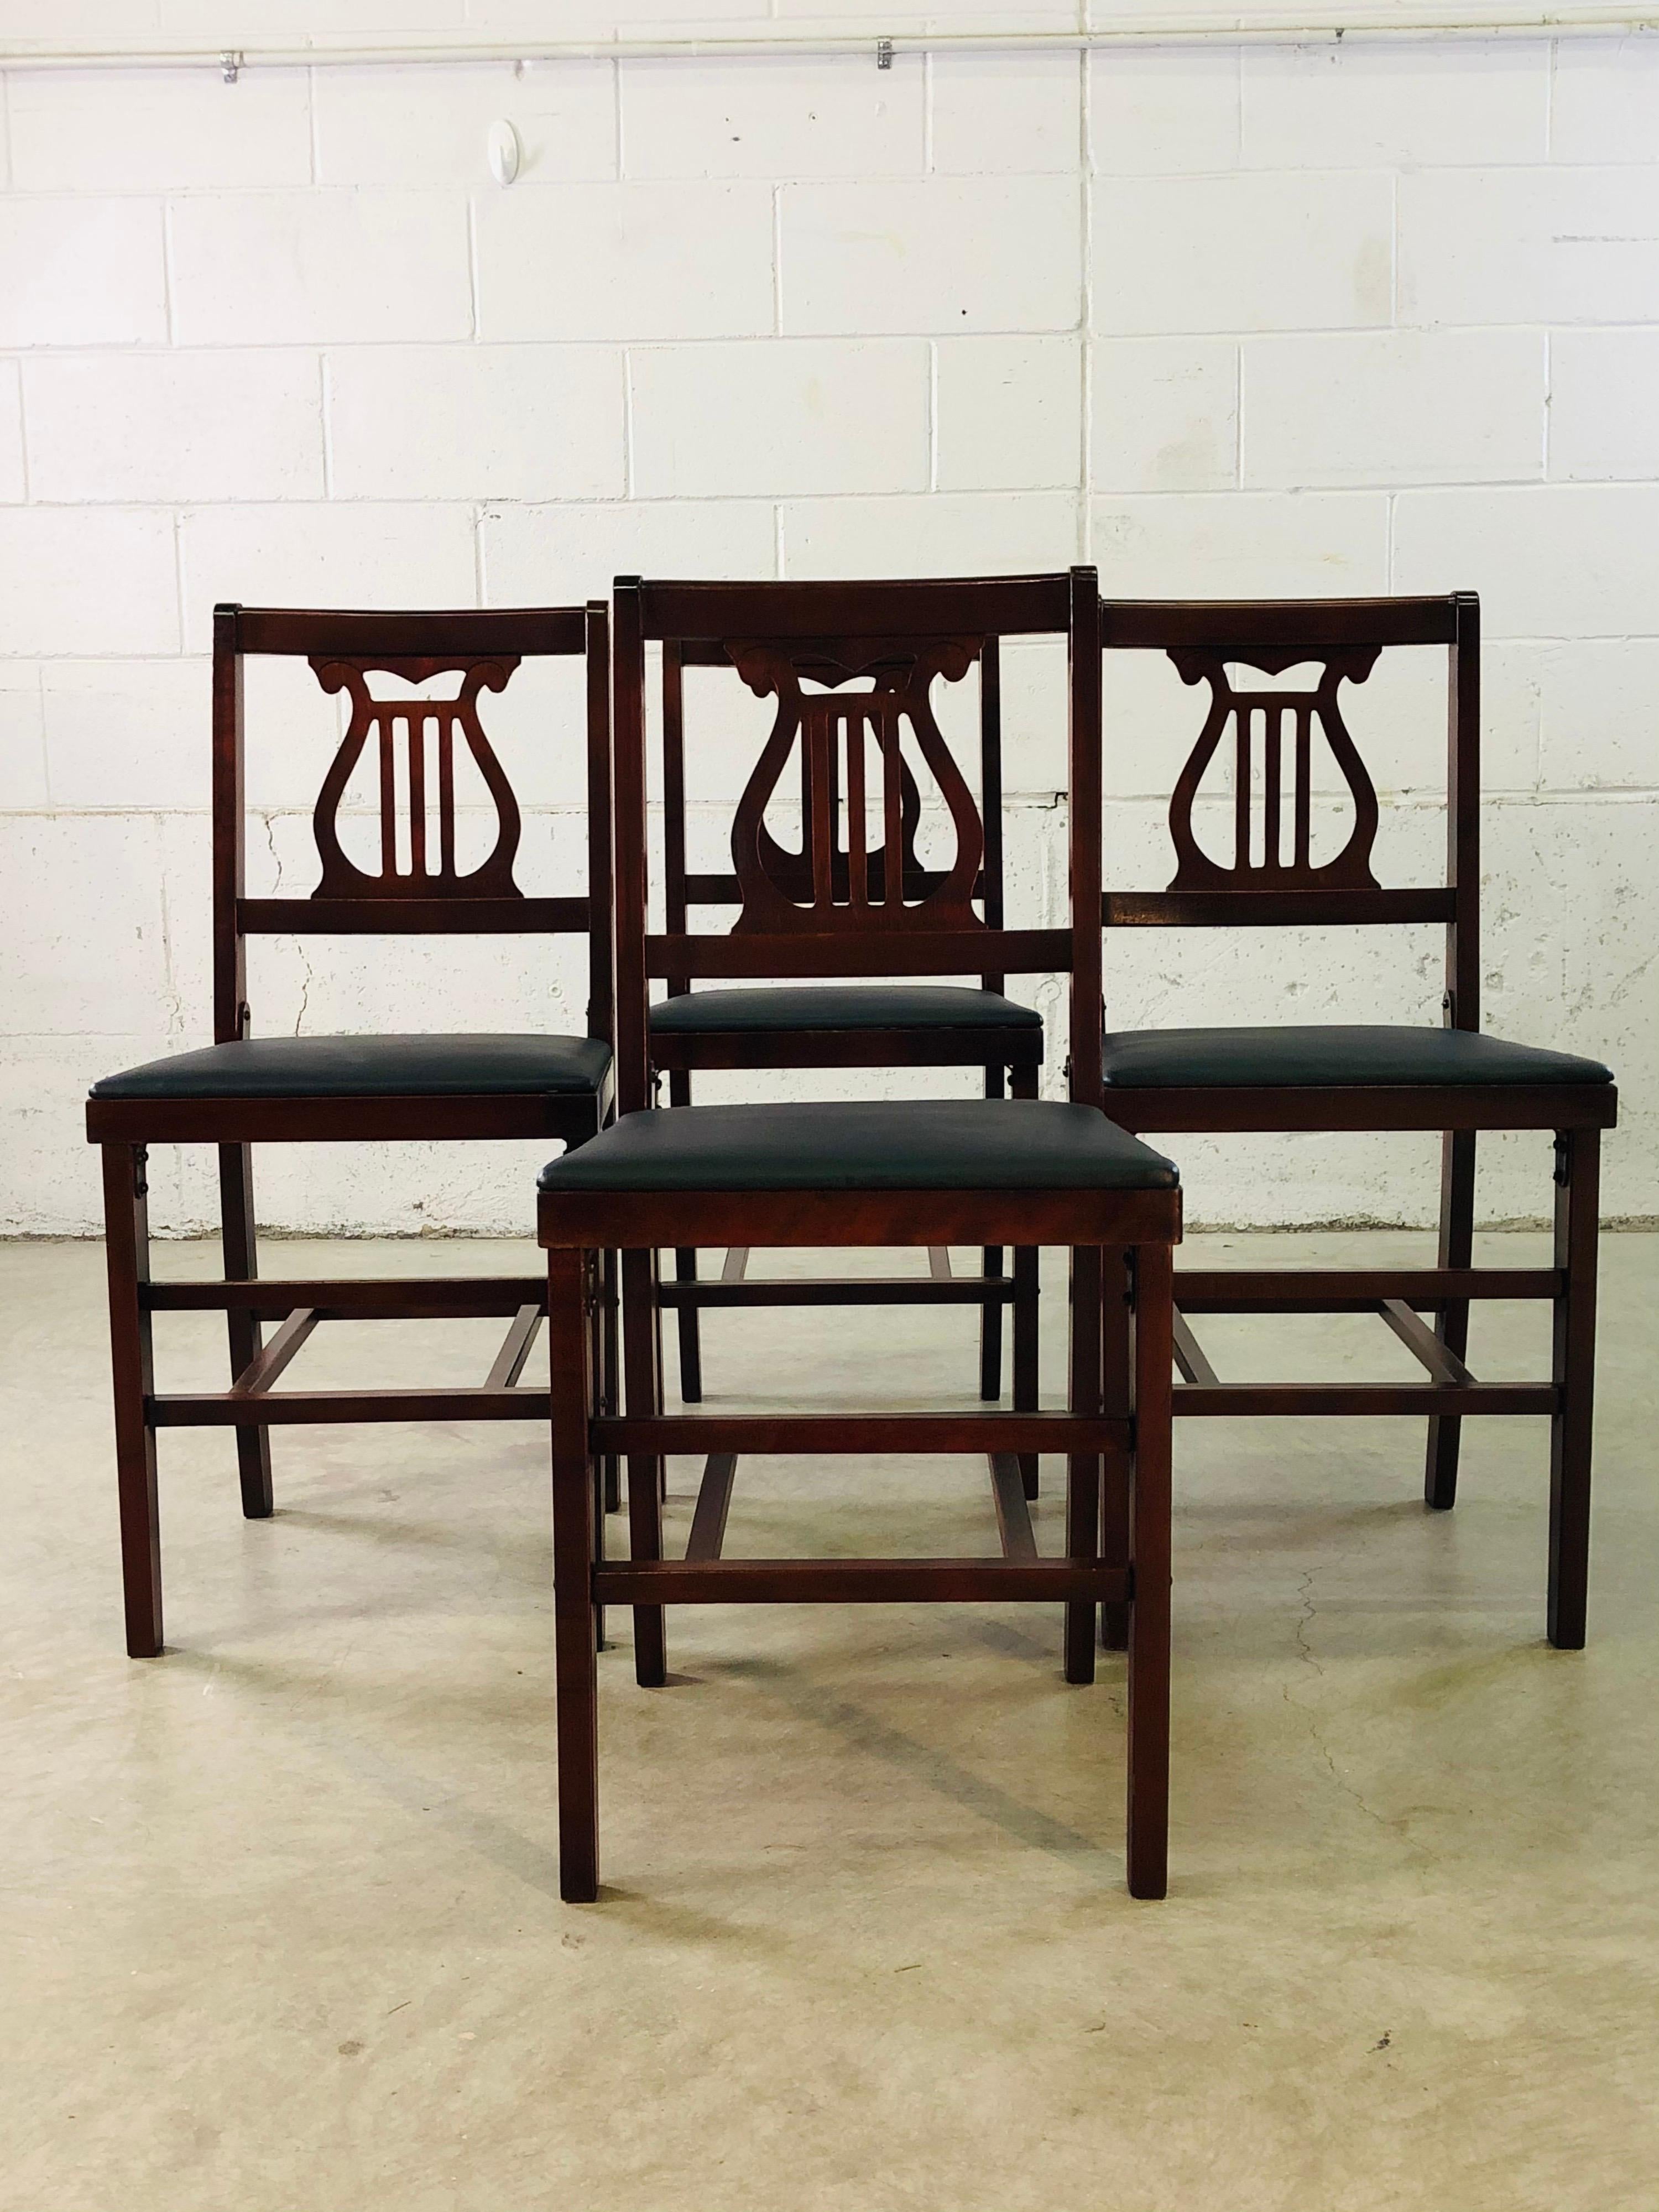 Vintage 1960s set of 4 mahogany wood folding dining chairs. The chairs have new black naugahyde seats and fold up for storage. Great for an apartment or small space. Excellent condition.